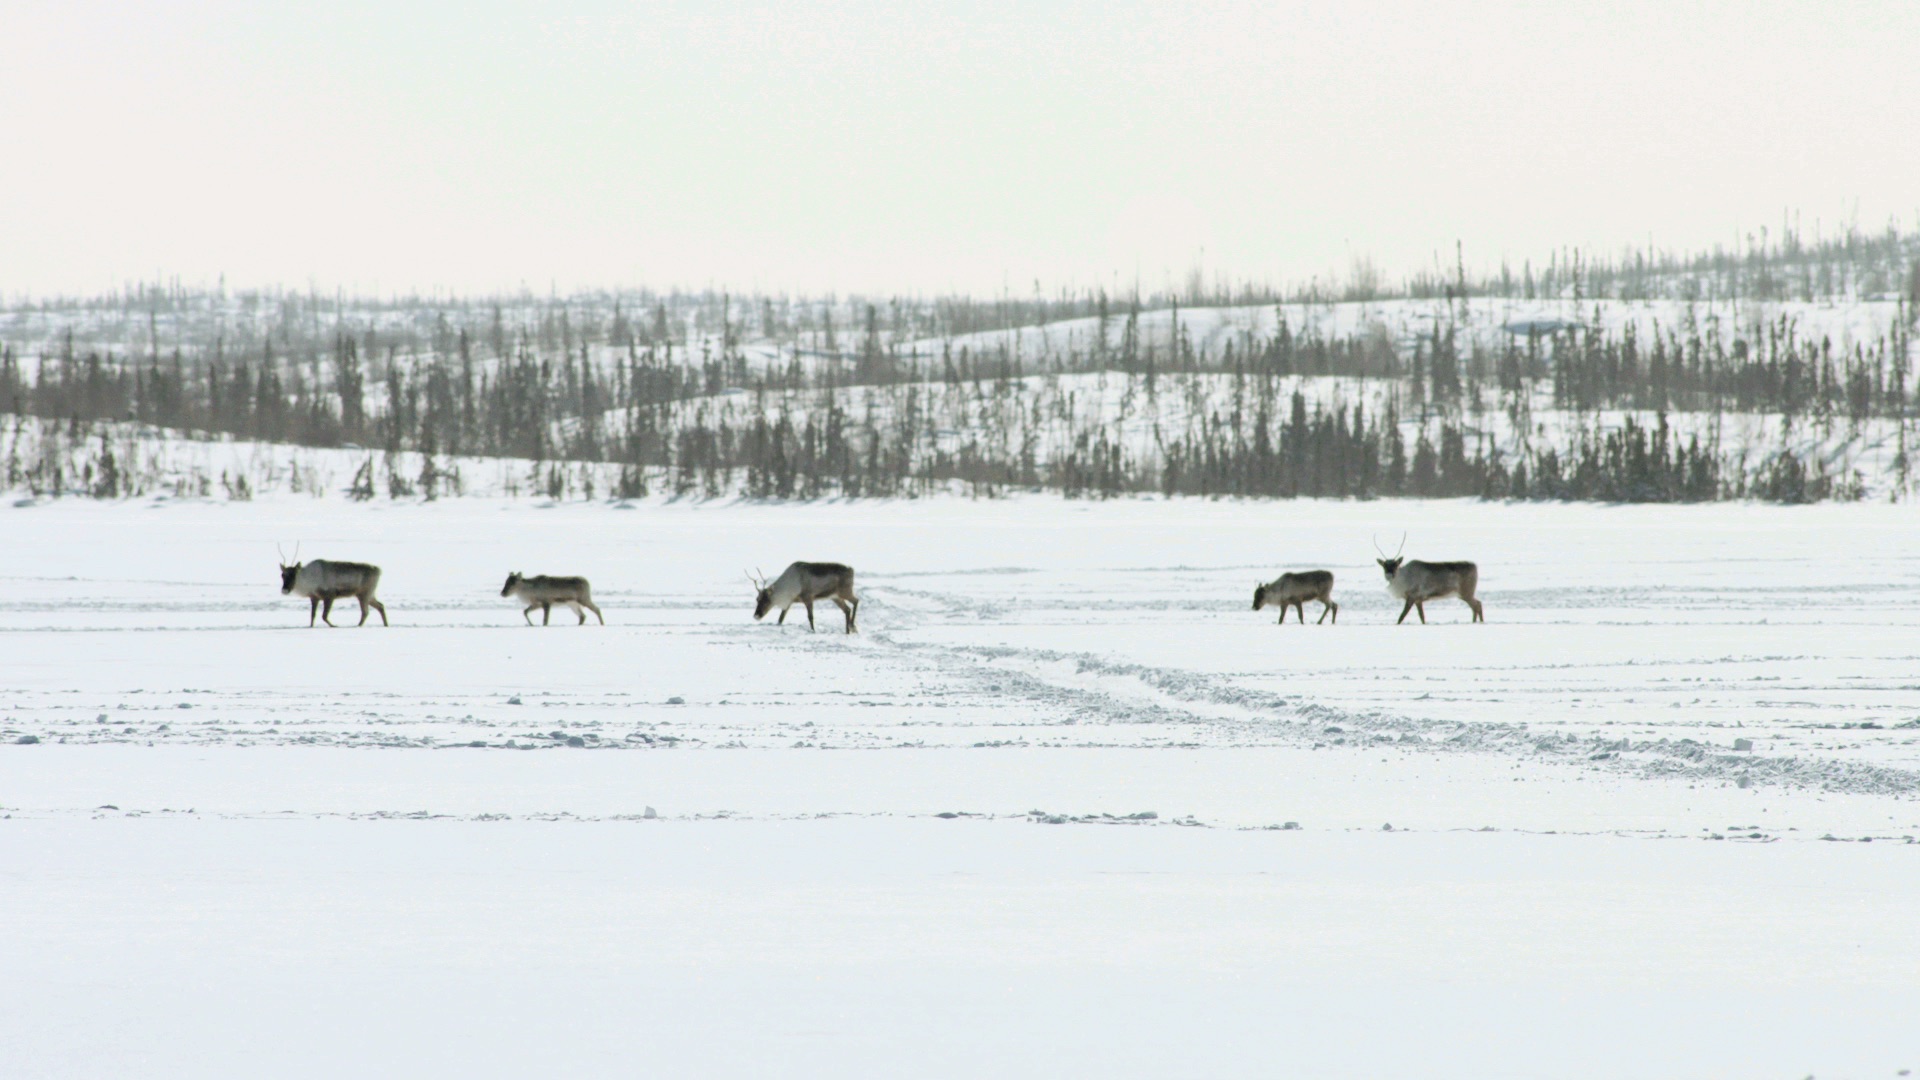  The remaining members of the caribou herd continue on their path. 